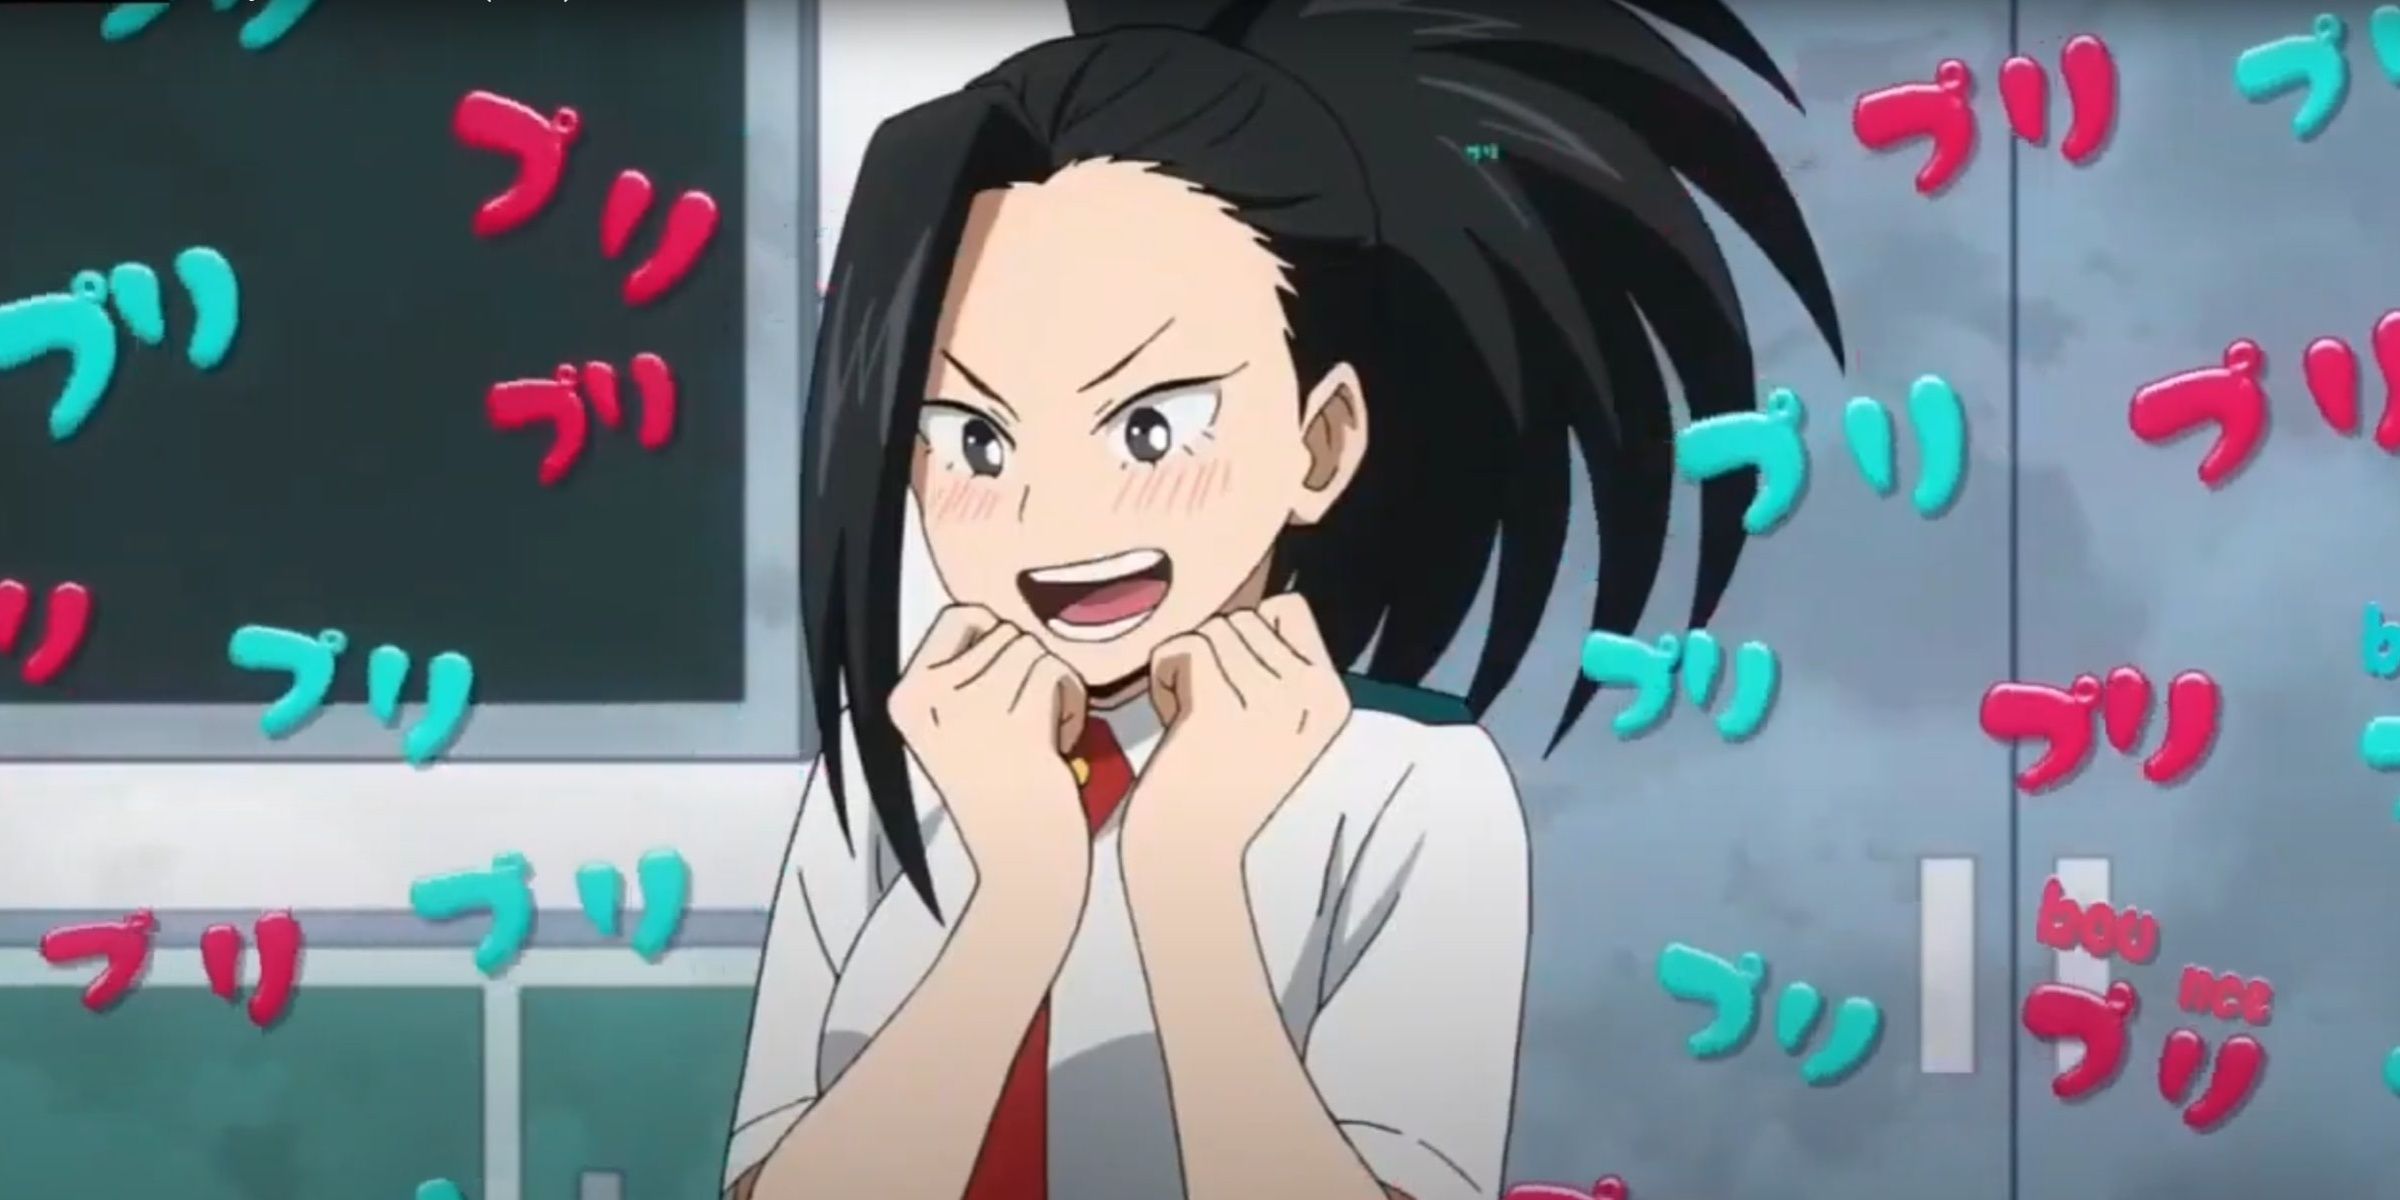 Momo gets excioted about studying in My Hero Academia.